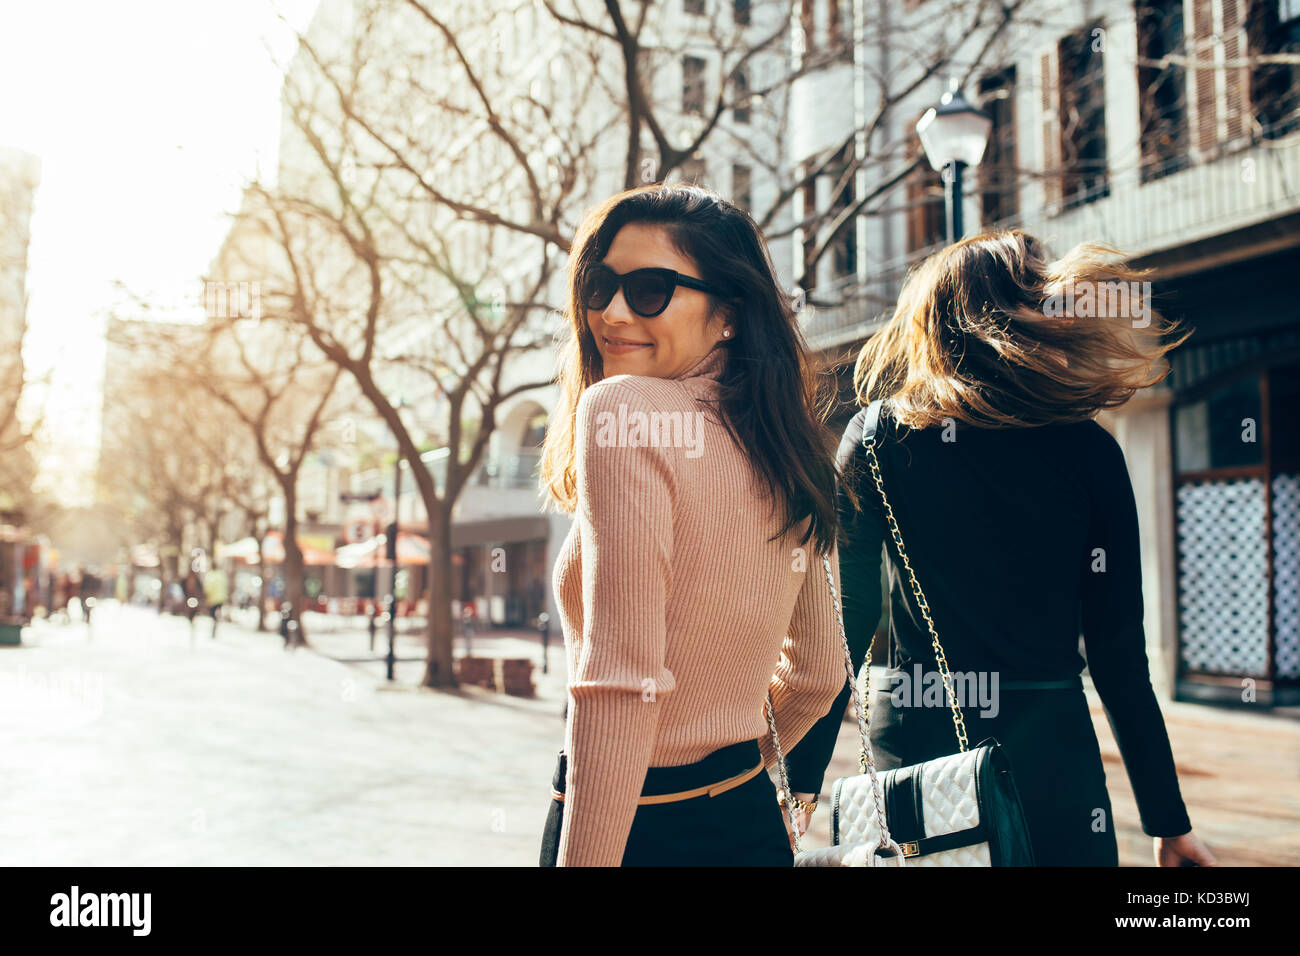 Asian woman walking with her friend on the city street. Two young women walking together outdoors on road. Stock Photo